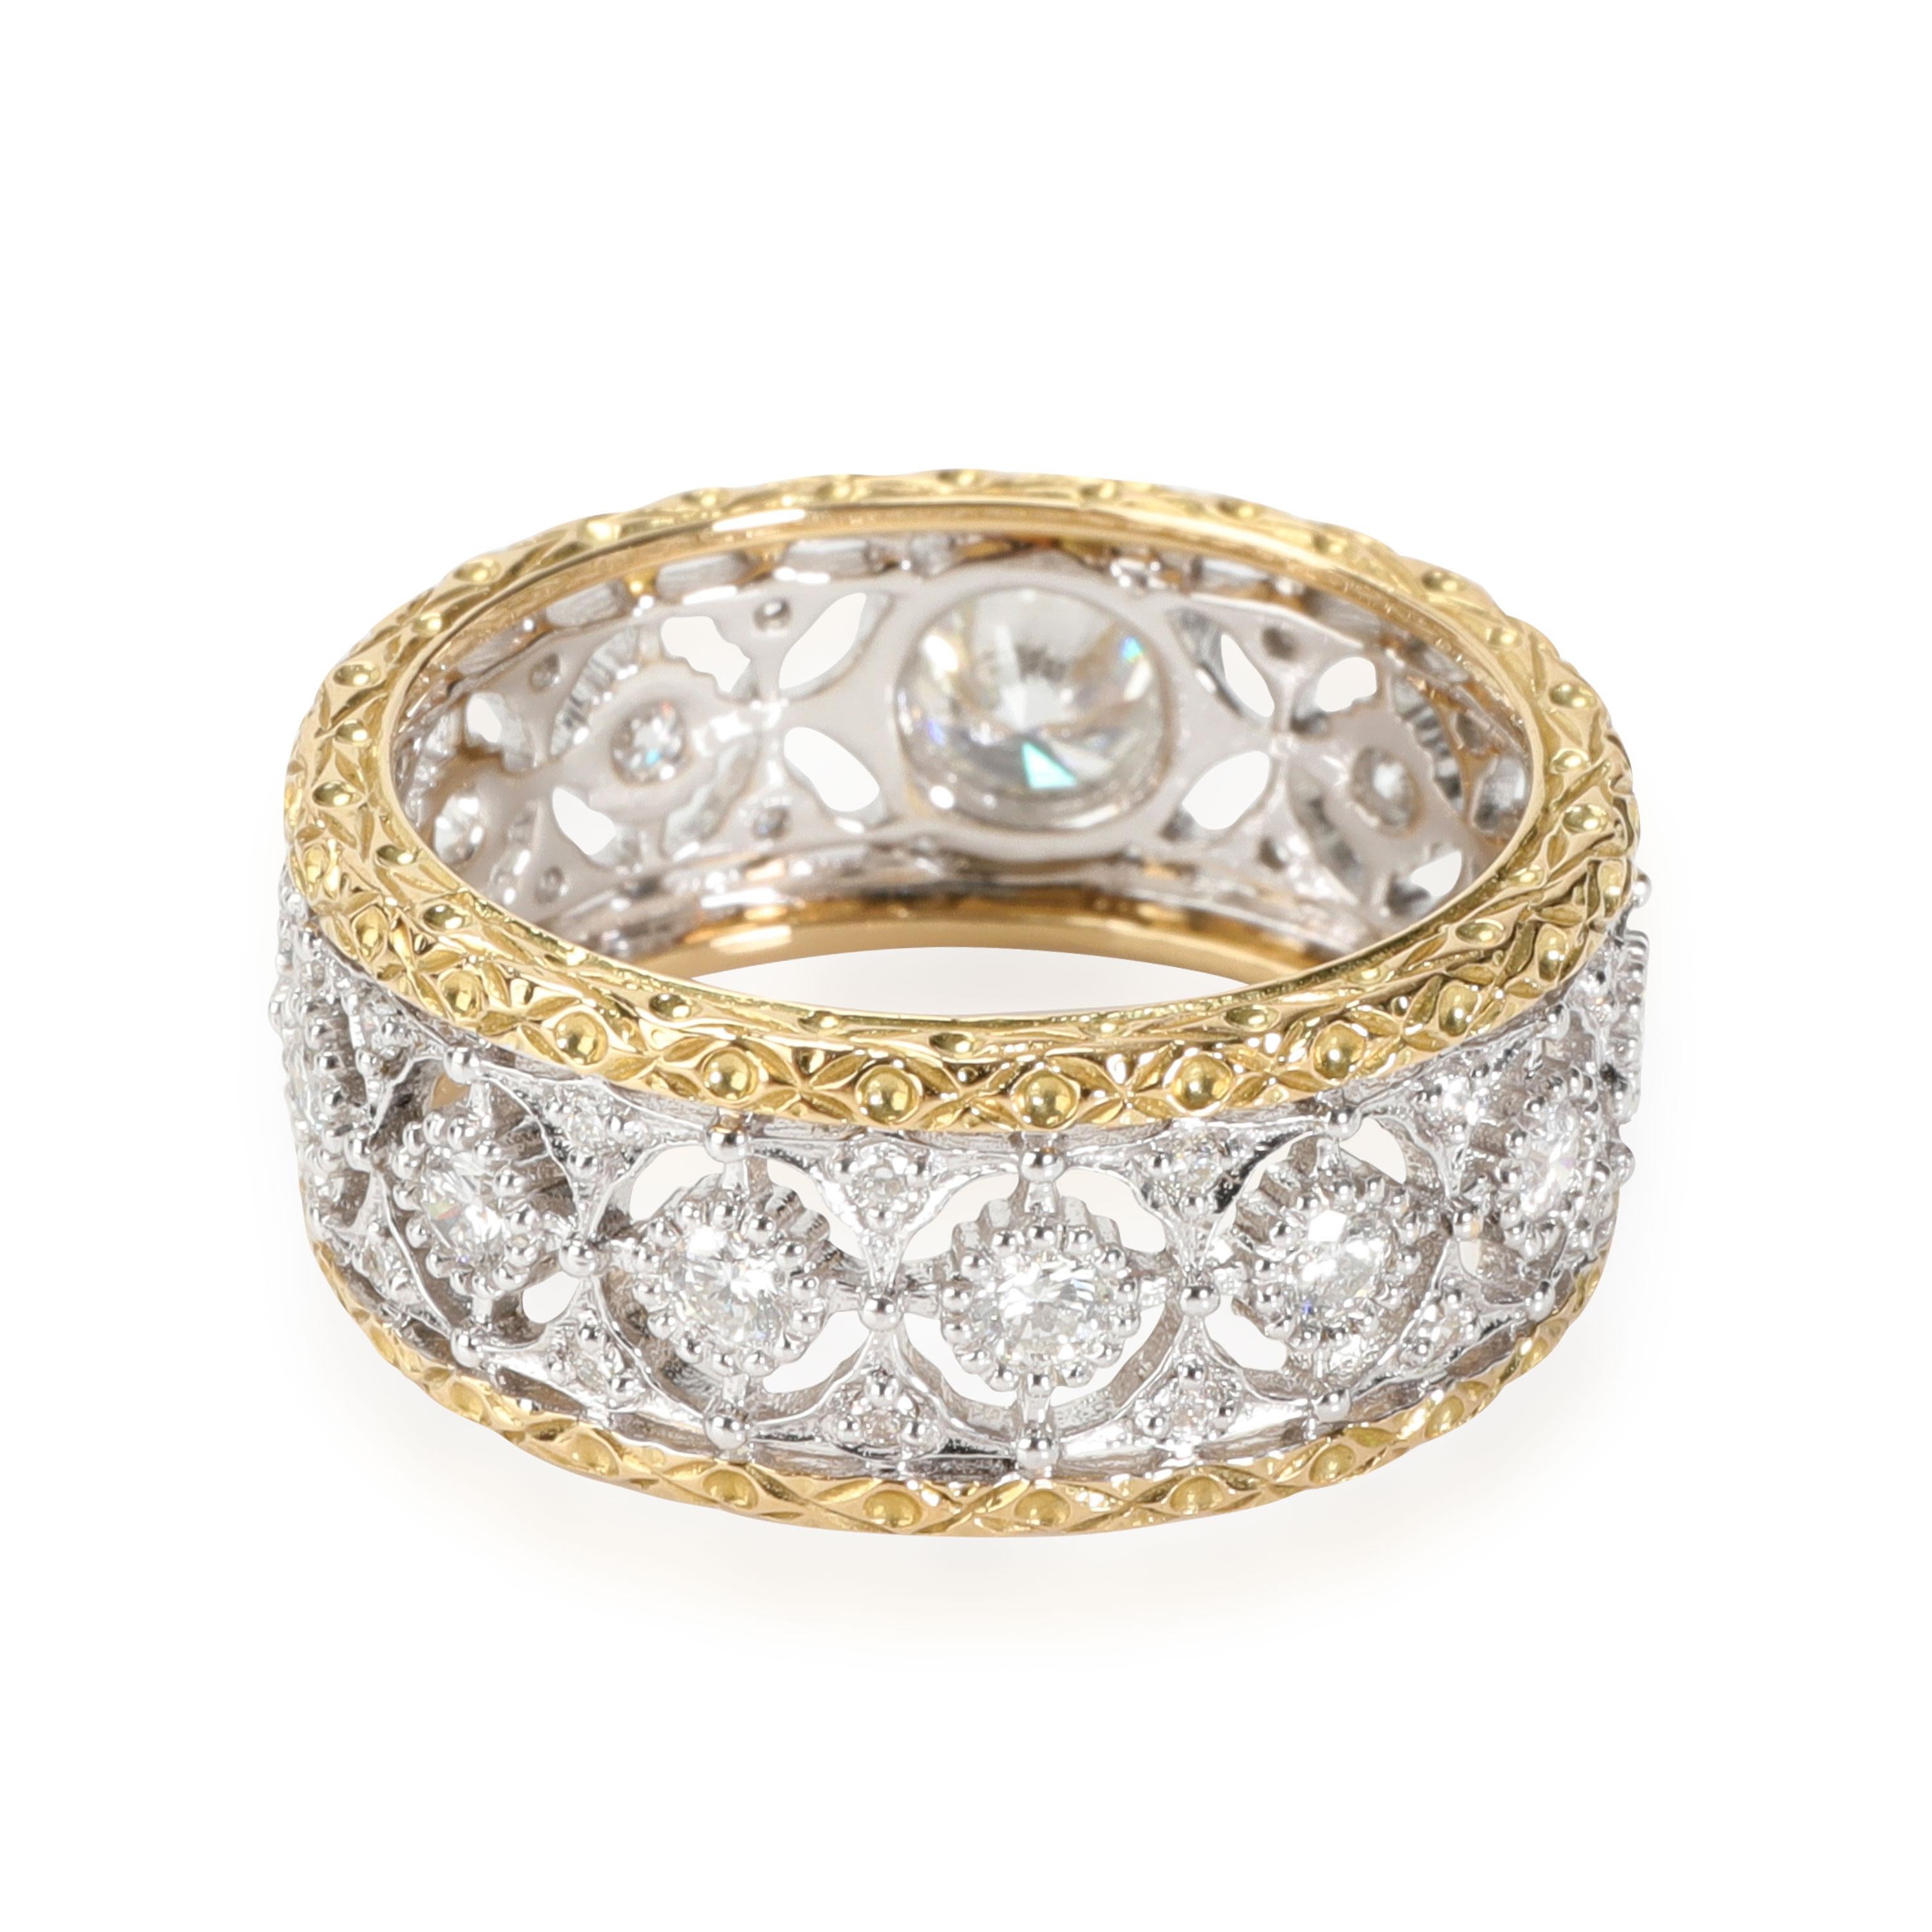 Diamond Filigree Band 18K White & Yellow Gold 0.90 CTW

PRIMARY DETAILS
SKU: 111704
Listing Title: Diamond Filigree Band 18K White & Yellow Gold 0.90 CTW
Condition Description: Retails for 5486 USD. In excellent condition and recently polished. The